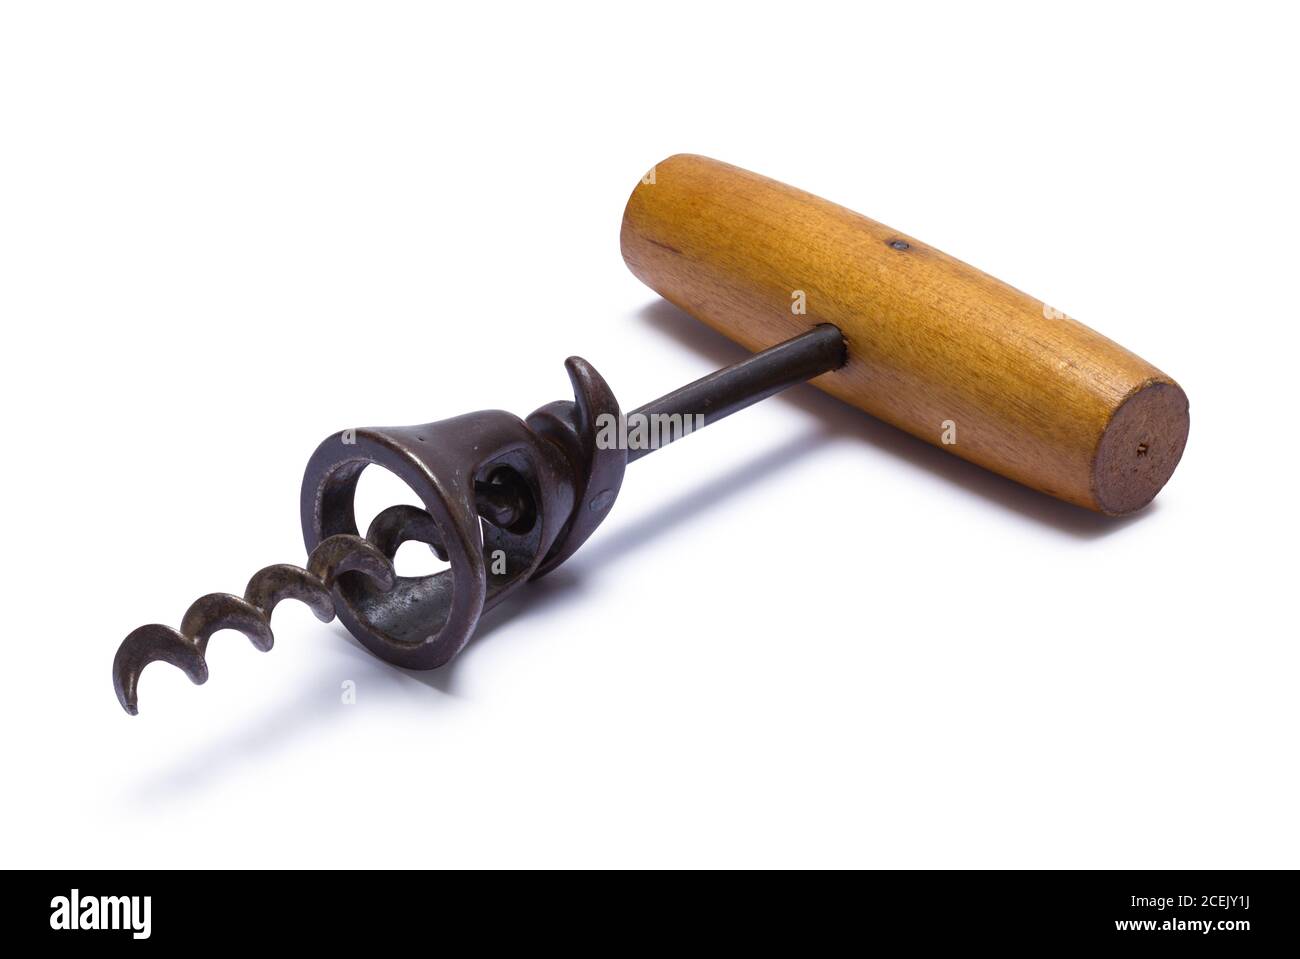 Old Cork Screw With Wood Handle Isolated on White. Stock Photo